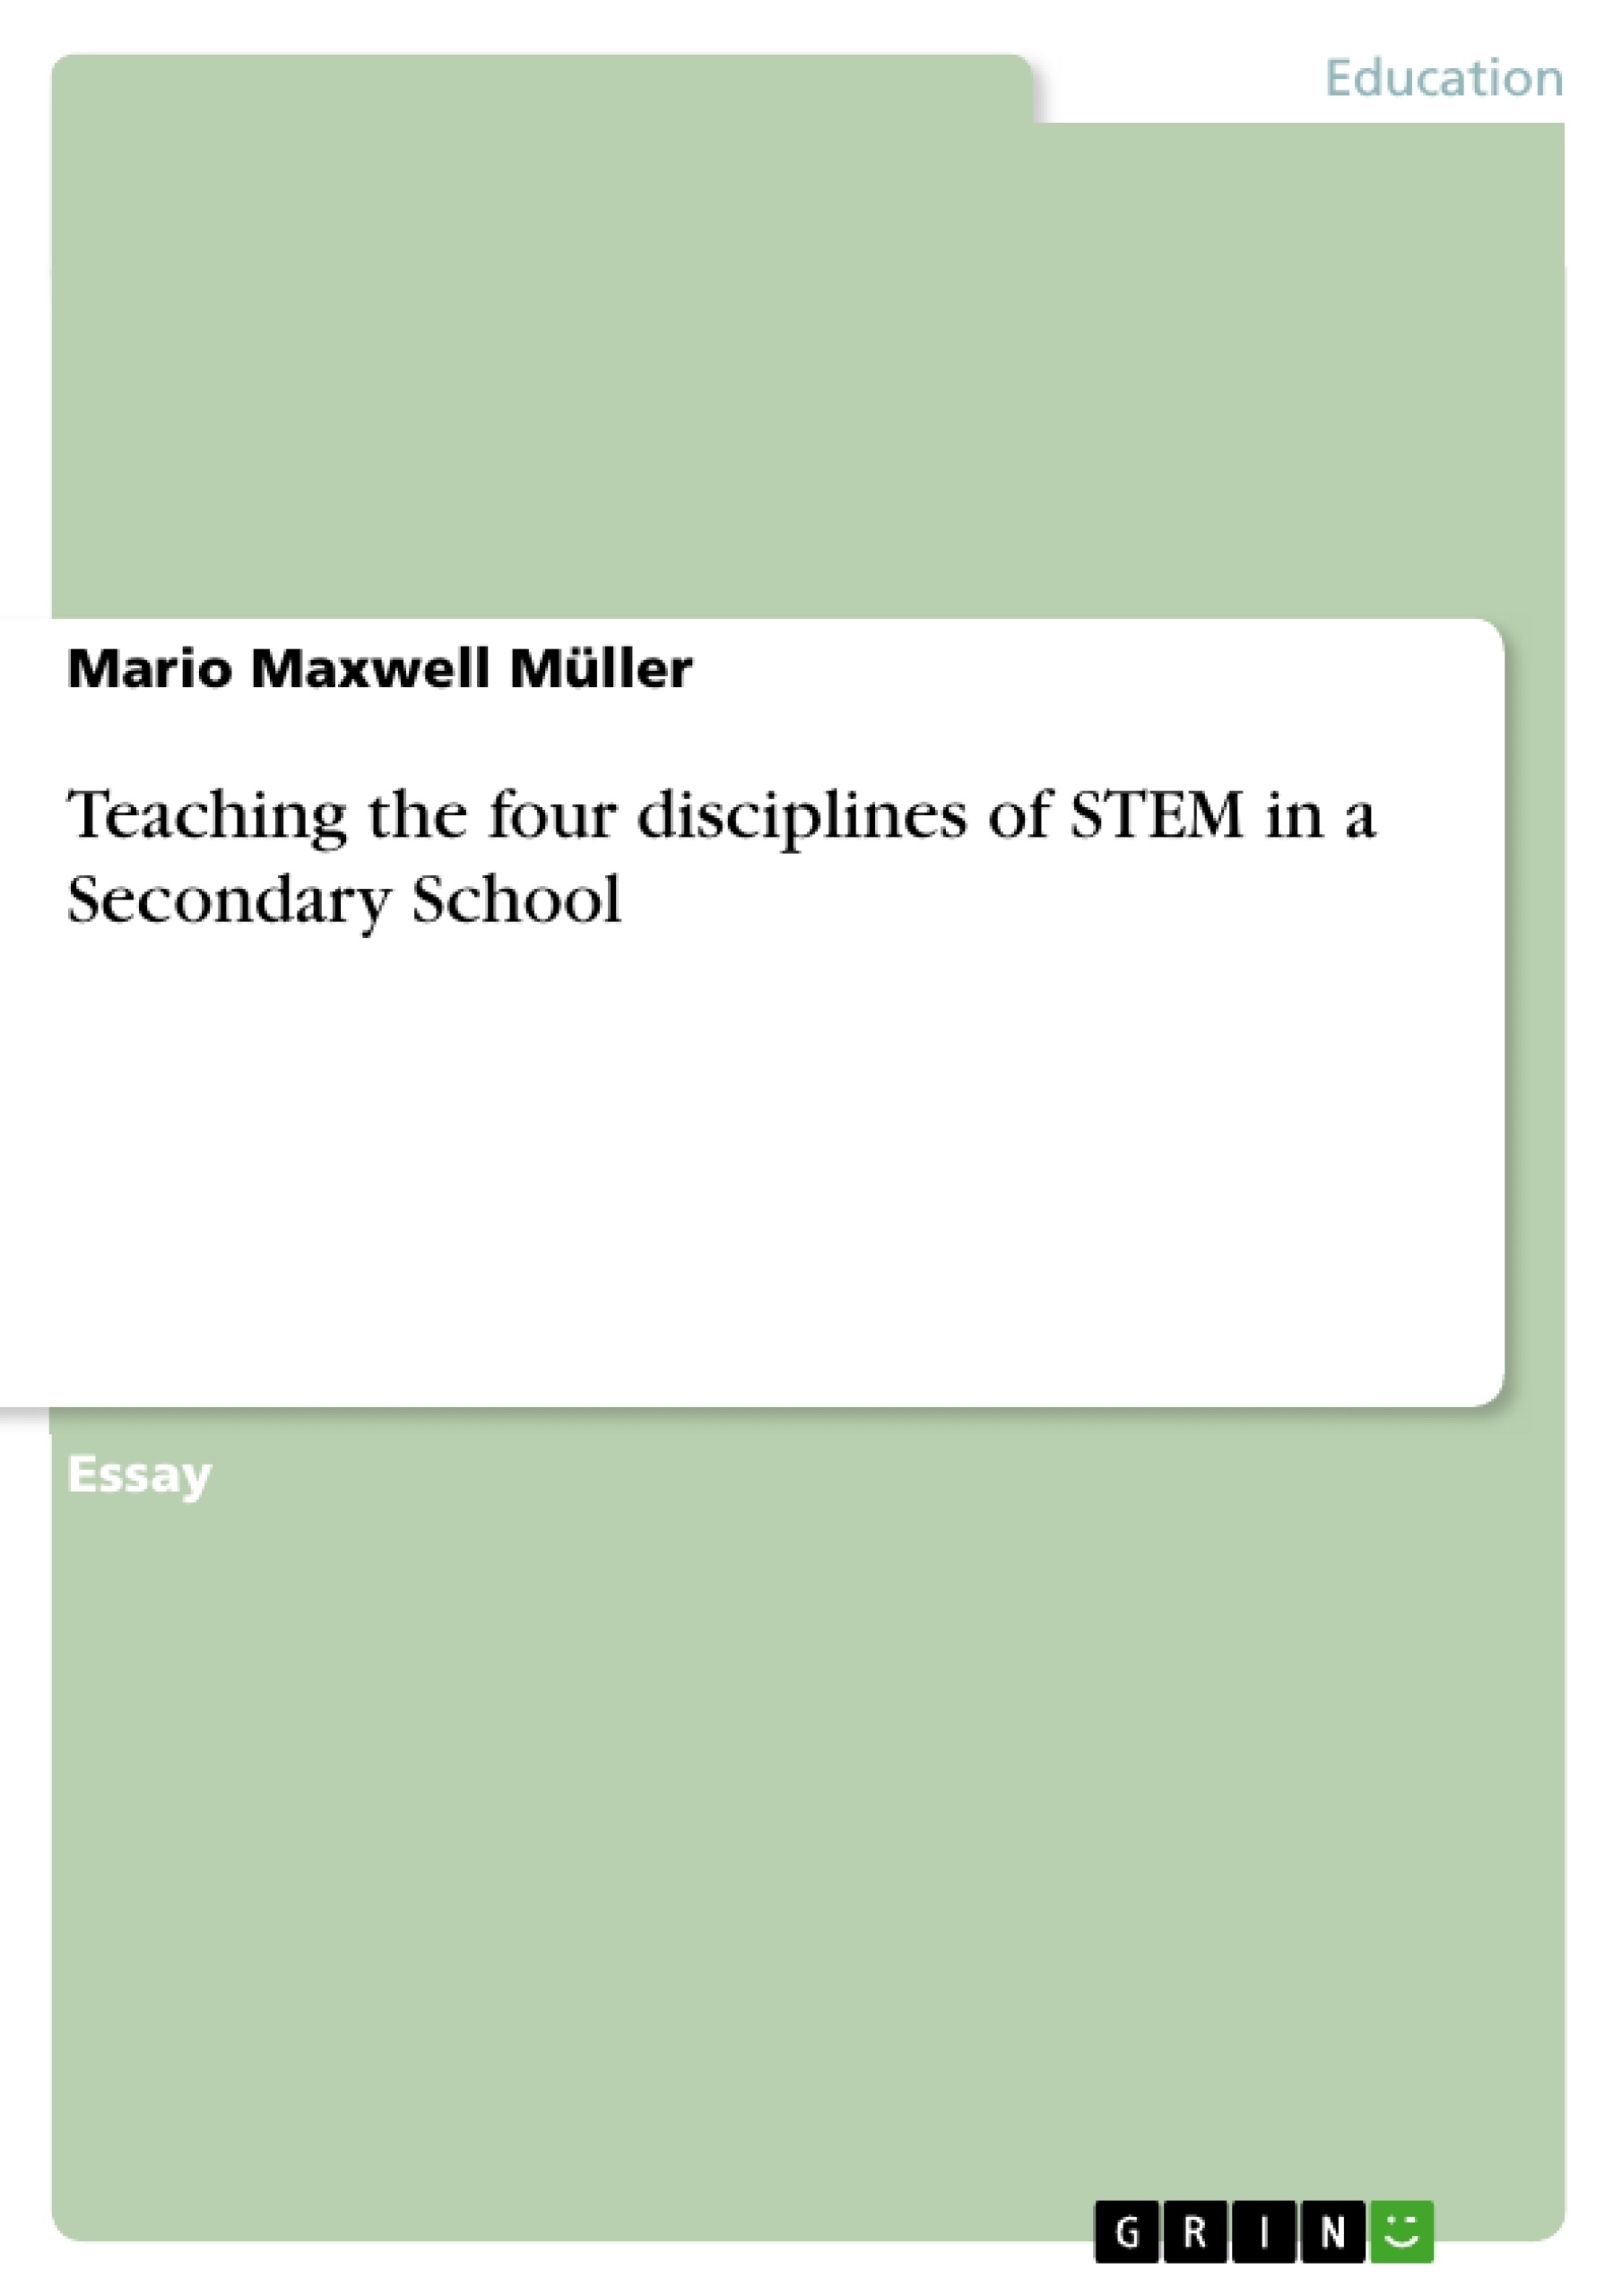 Title: Teaching the four disciplines of STEM in a Secondary School